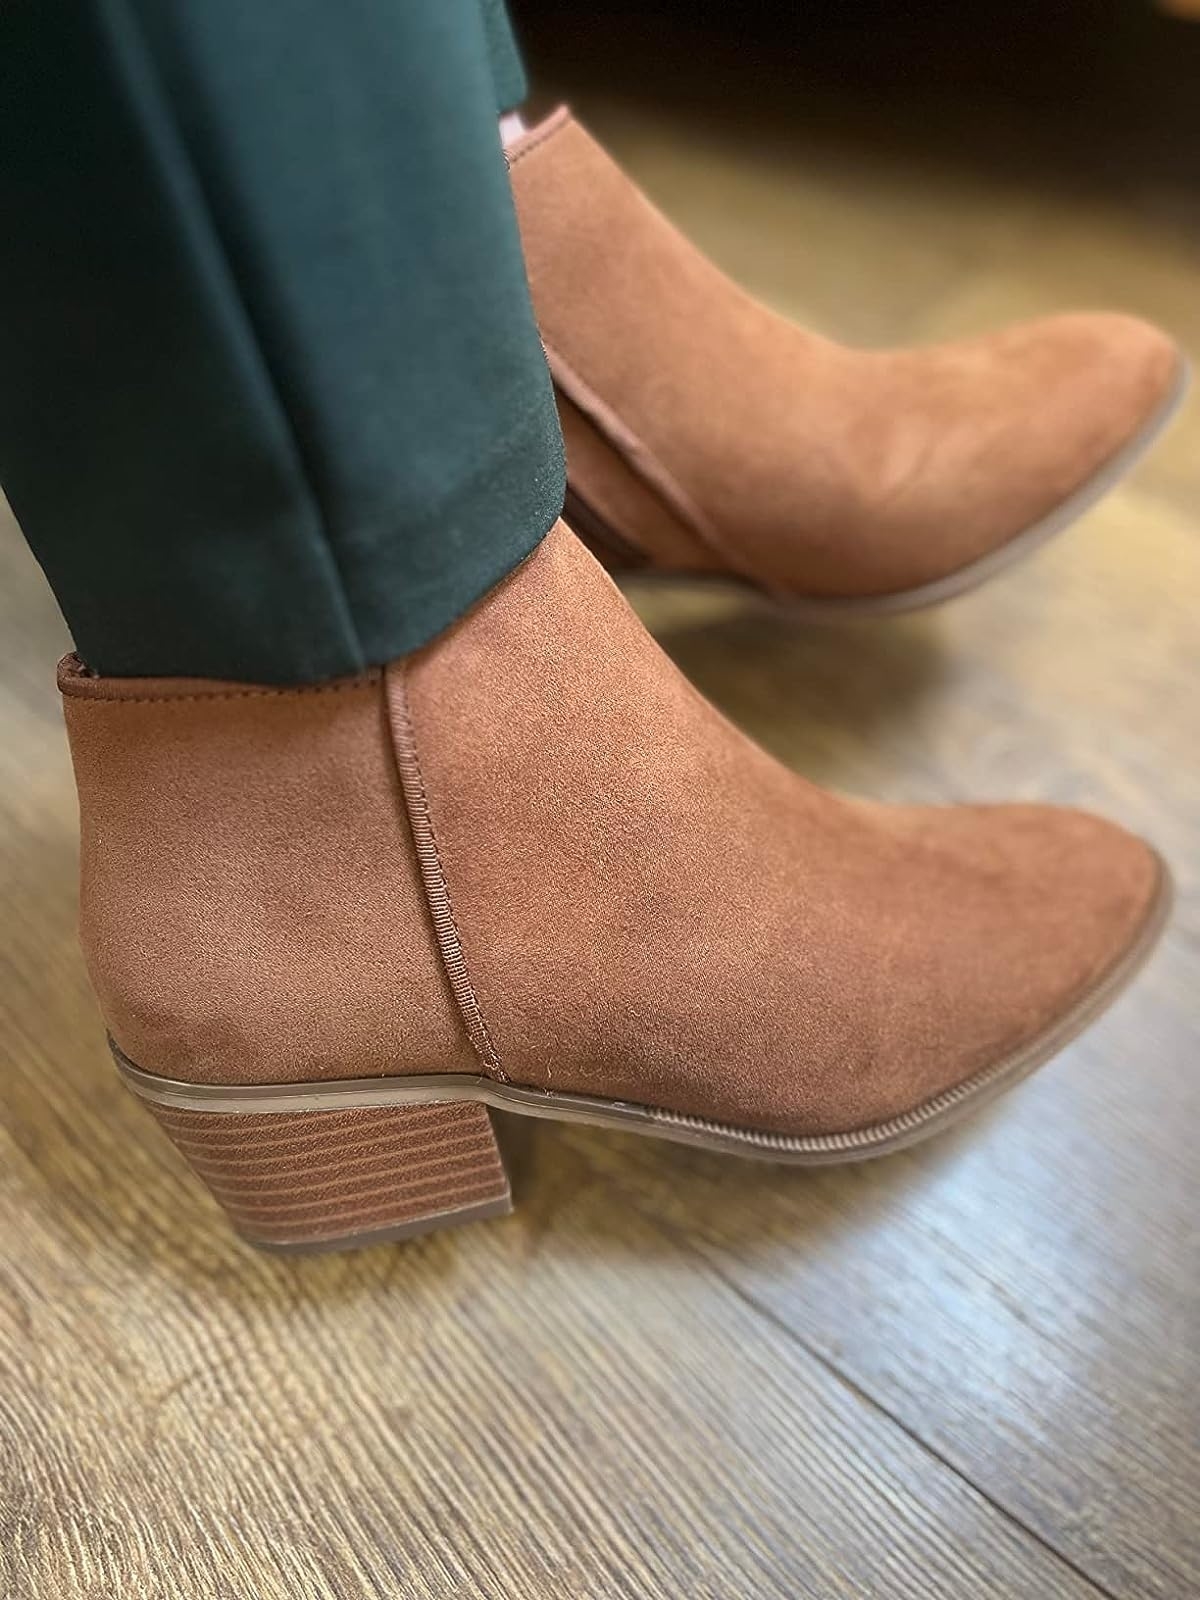 Reviewer wearing the brown suede ankle boots